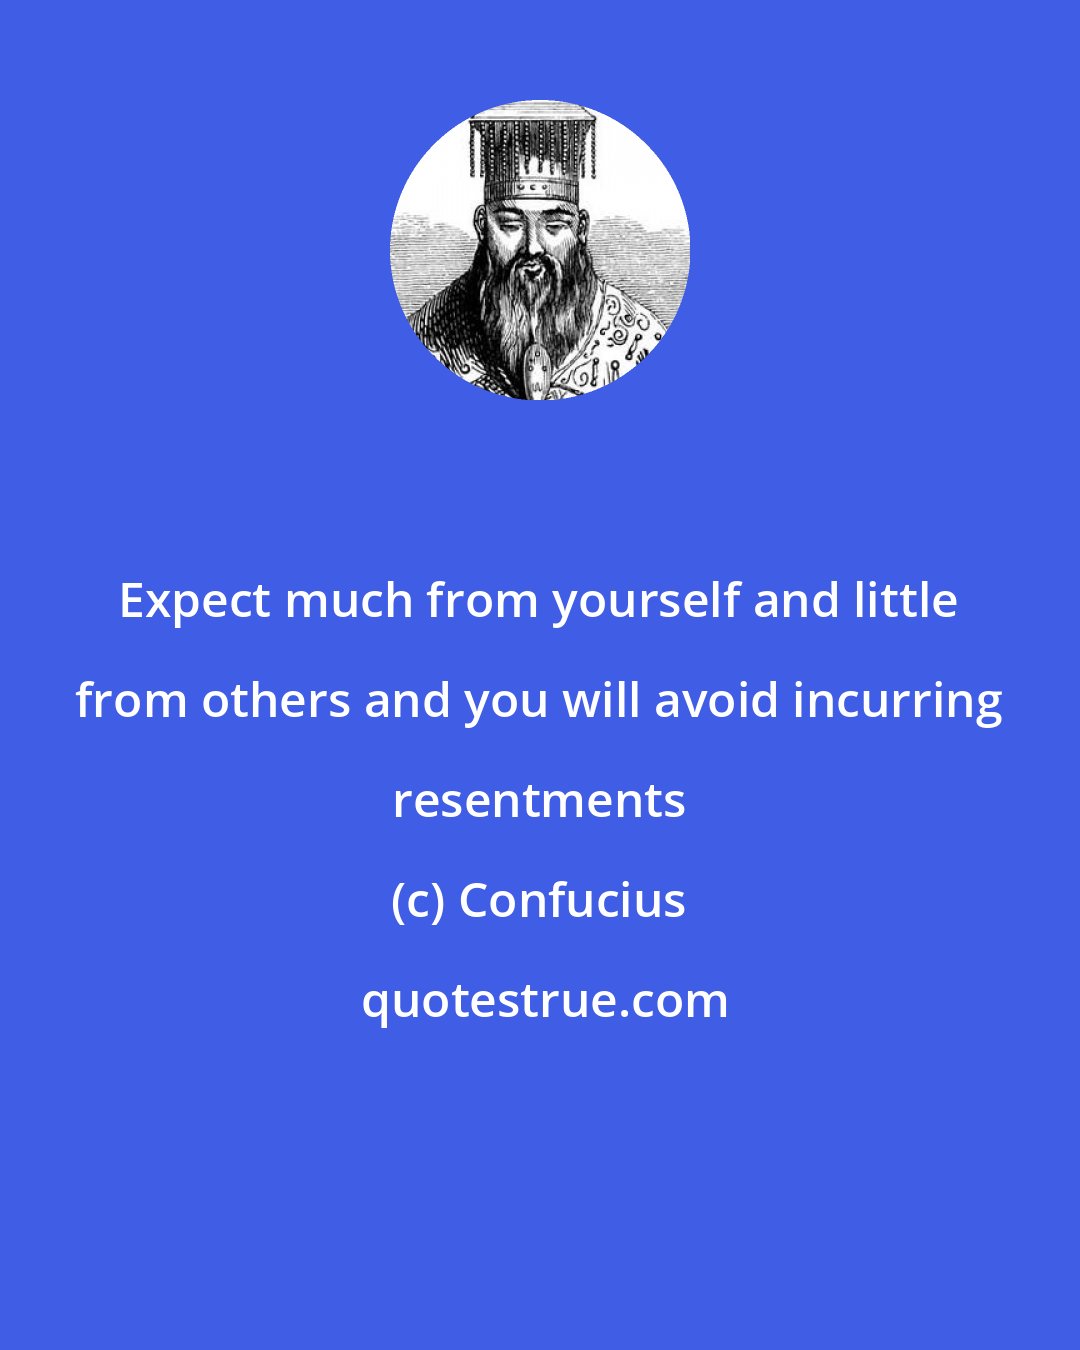 Confucius: Expect much from yourself and little from others and you will avoid incurring resentments